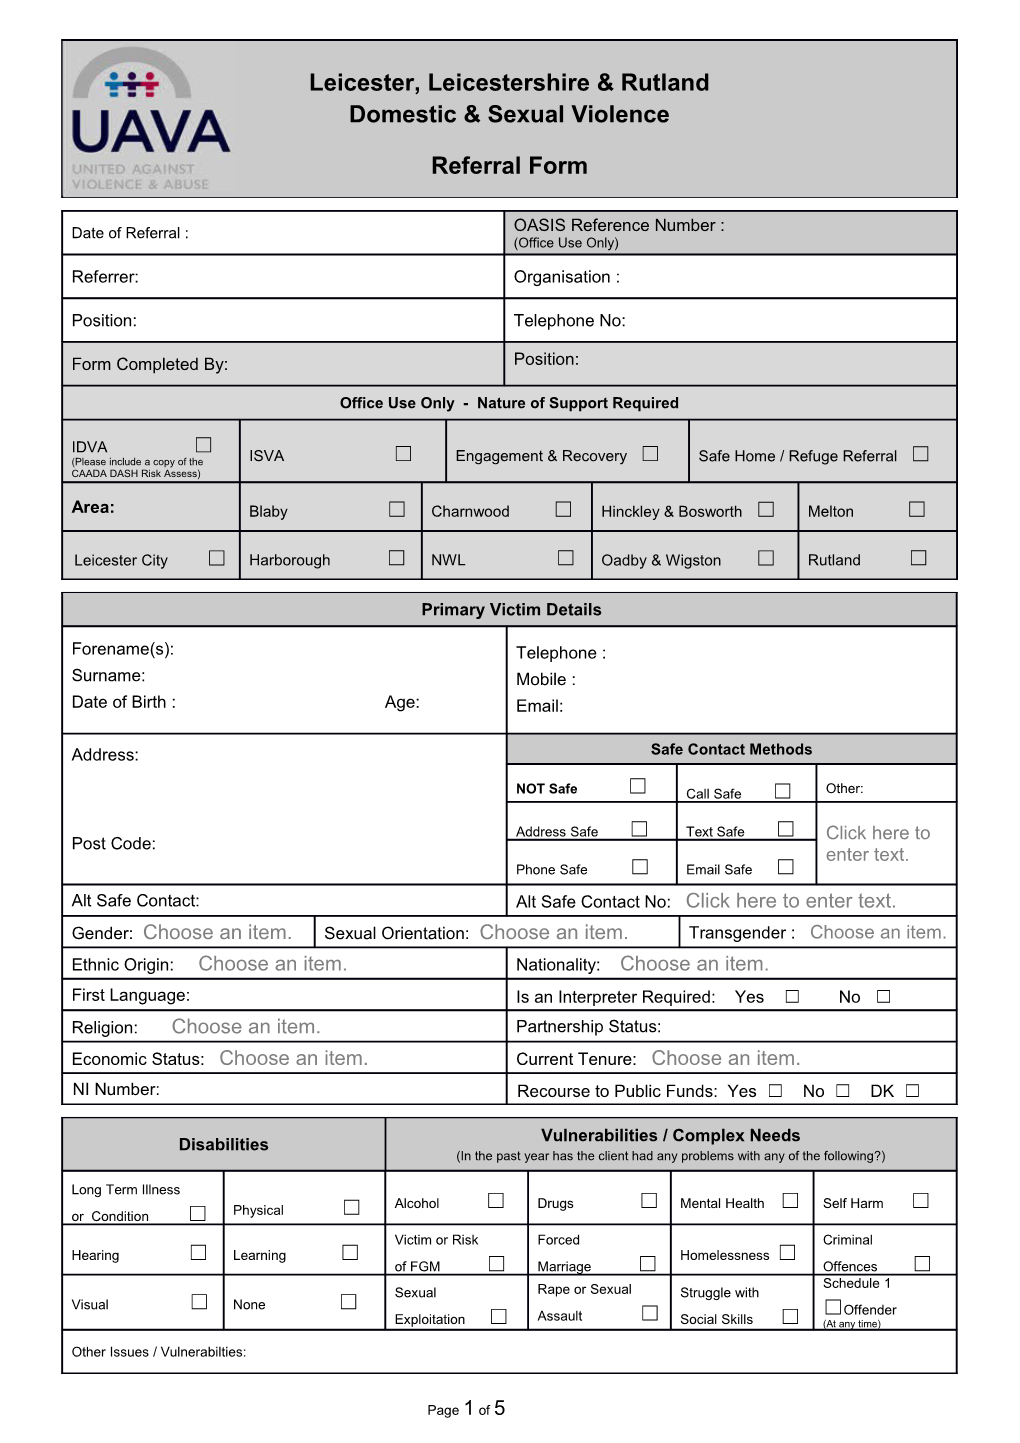 Continuation Sheet - Referral Form